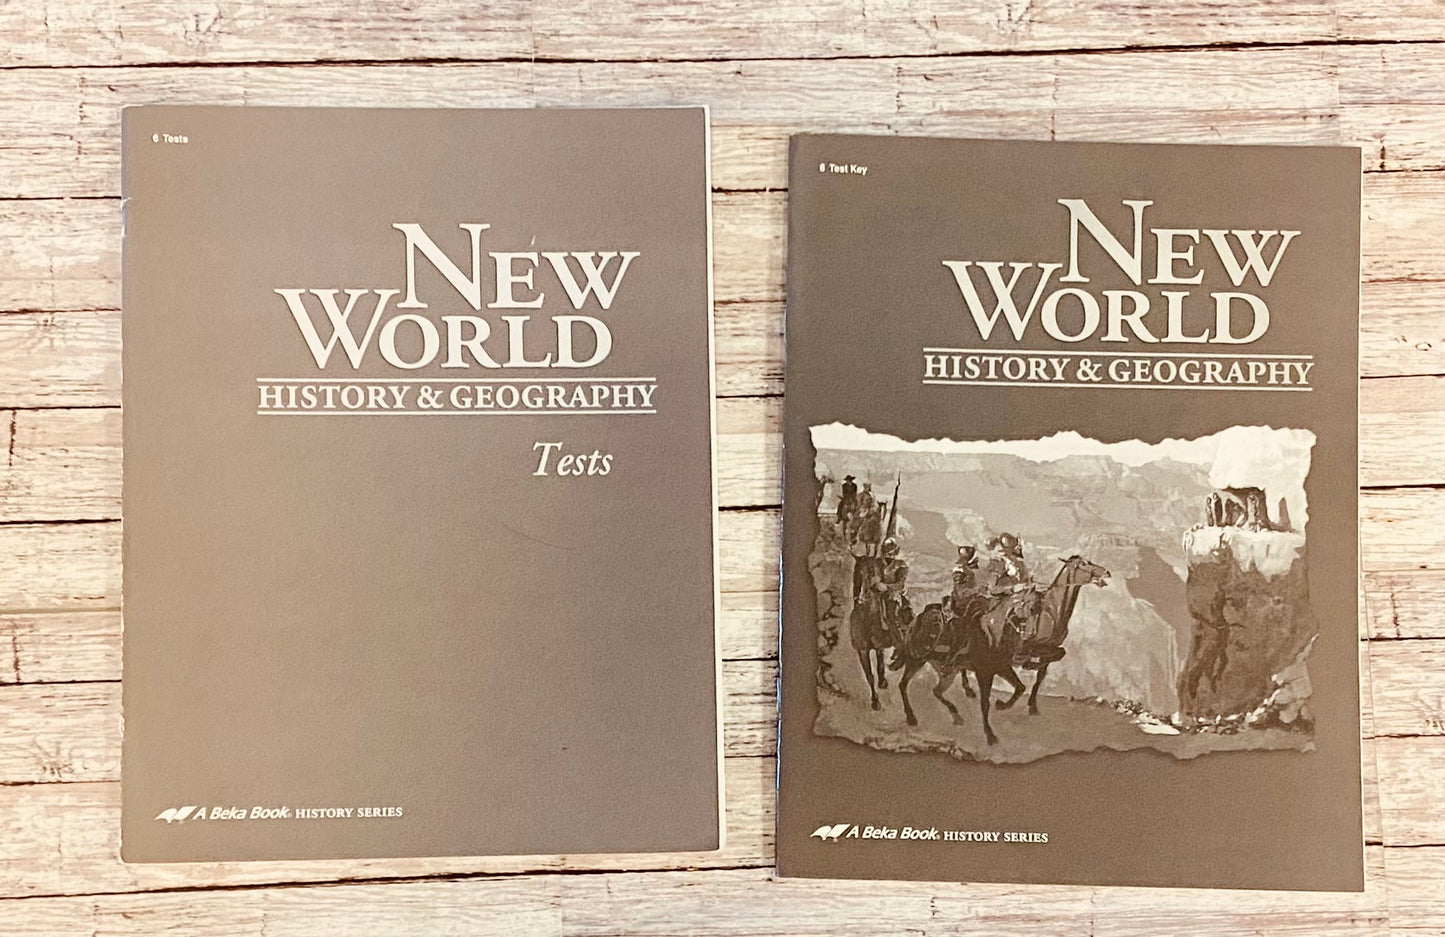 New World History & Geography - Anchored Homeschool Resource Center